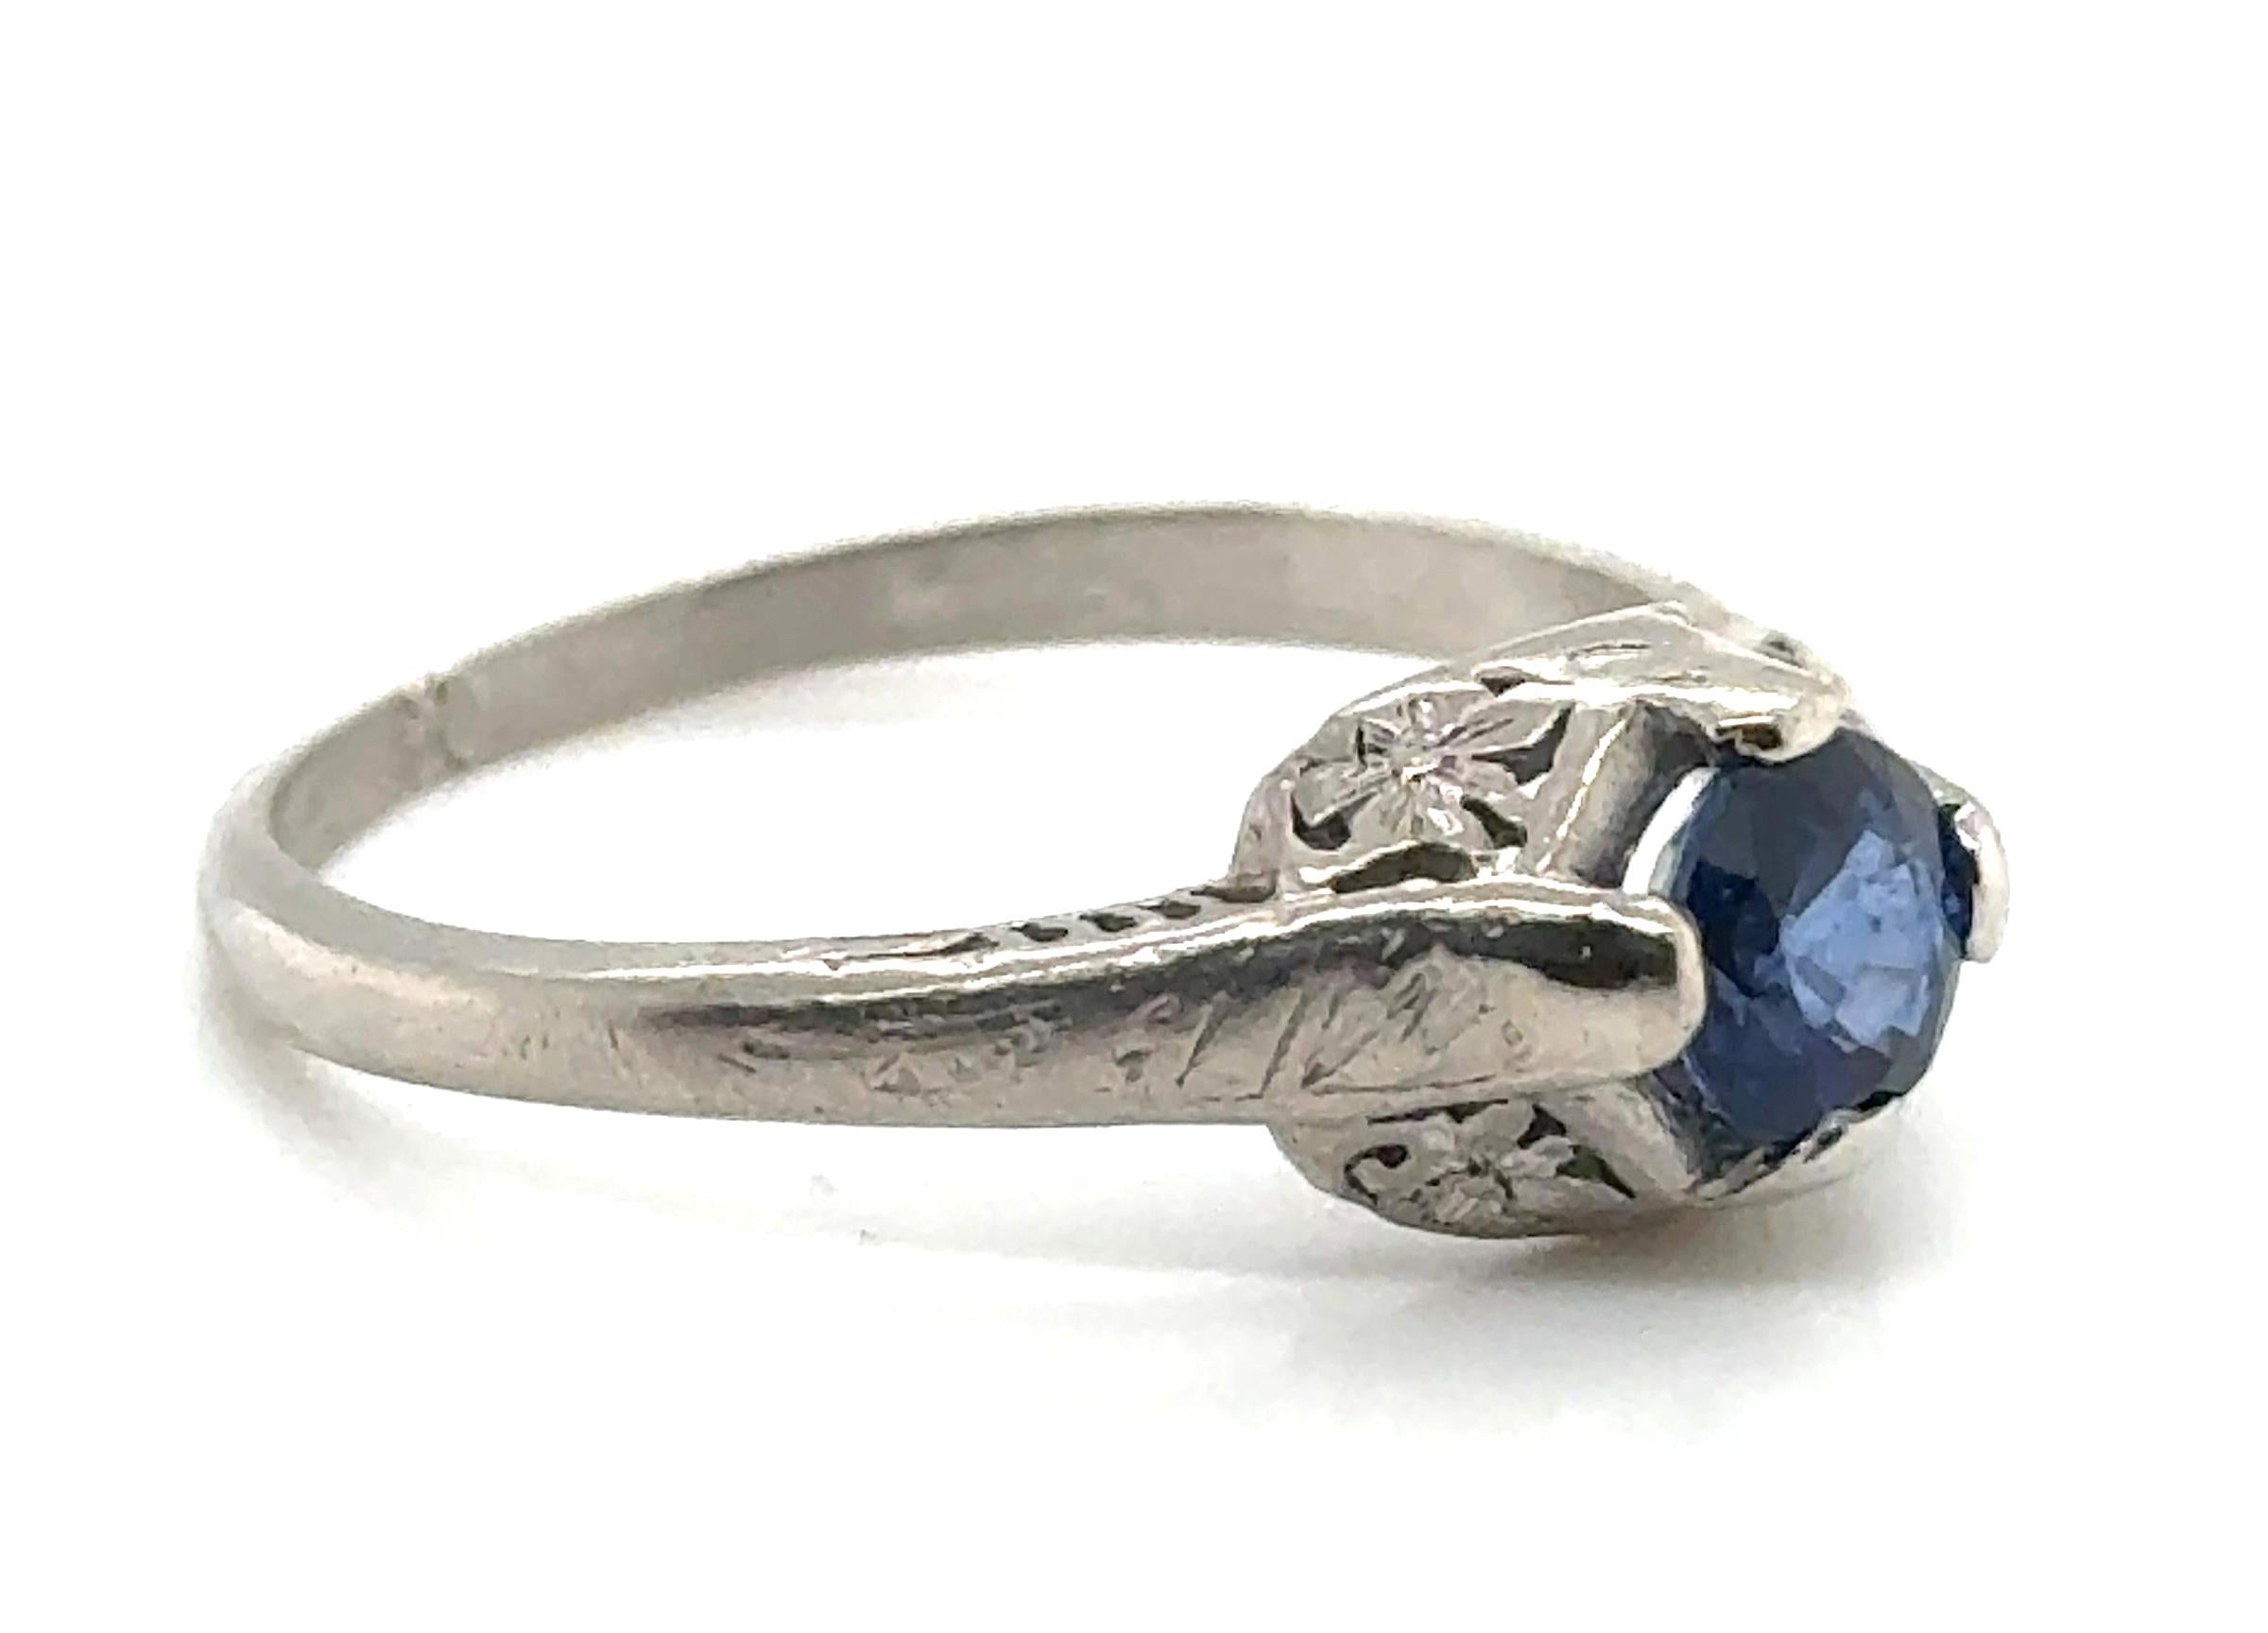 Genuine Original Antique from 1920's Sapphire Ring .70ct Solitaire Platinum Art Deco


Featuring a Gorgeous .70ctGenuine Natural Round Blue Sapphire Center

Artful Engraving with Bold Royal Blue Gemstone  

Hand Engraved 